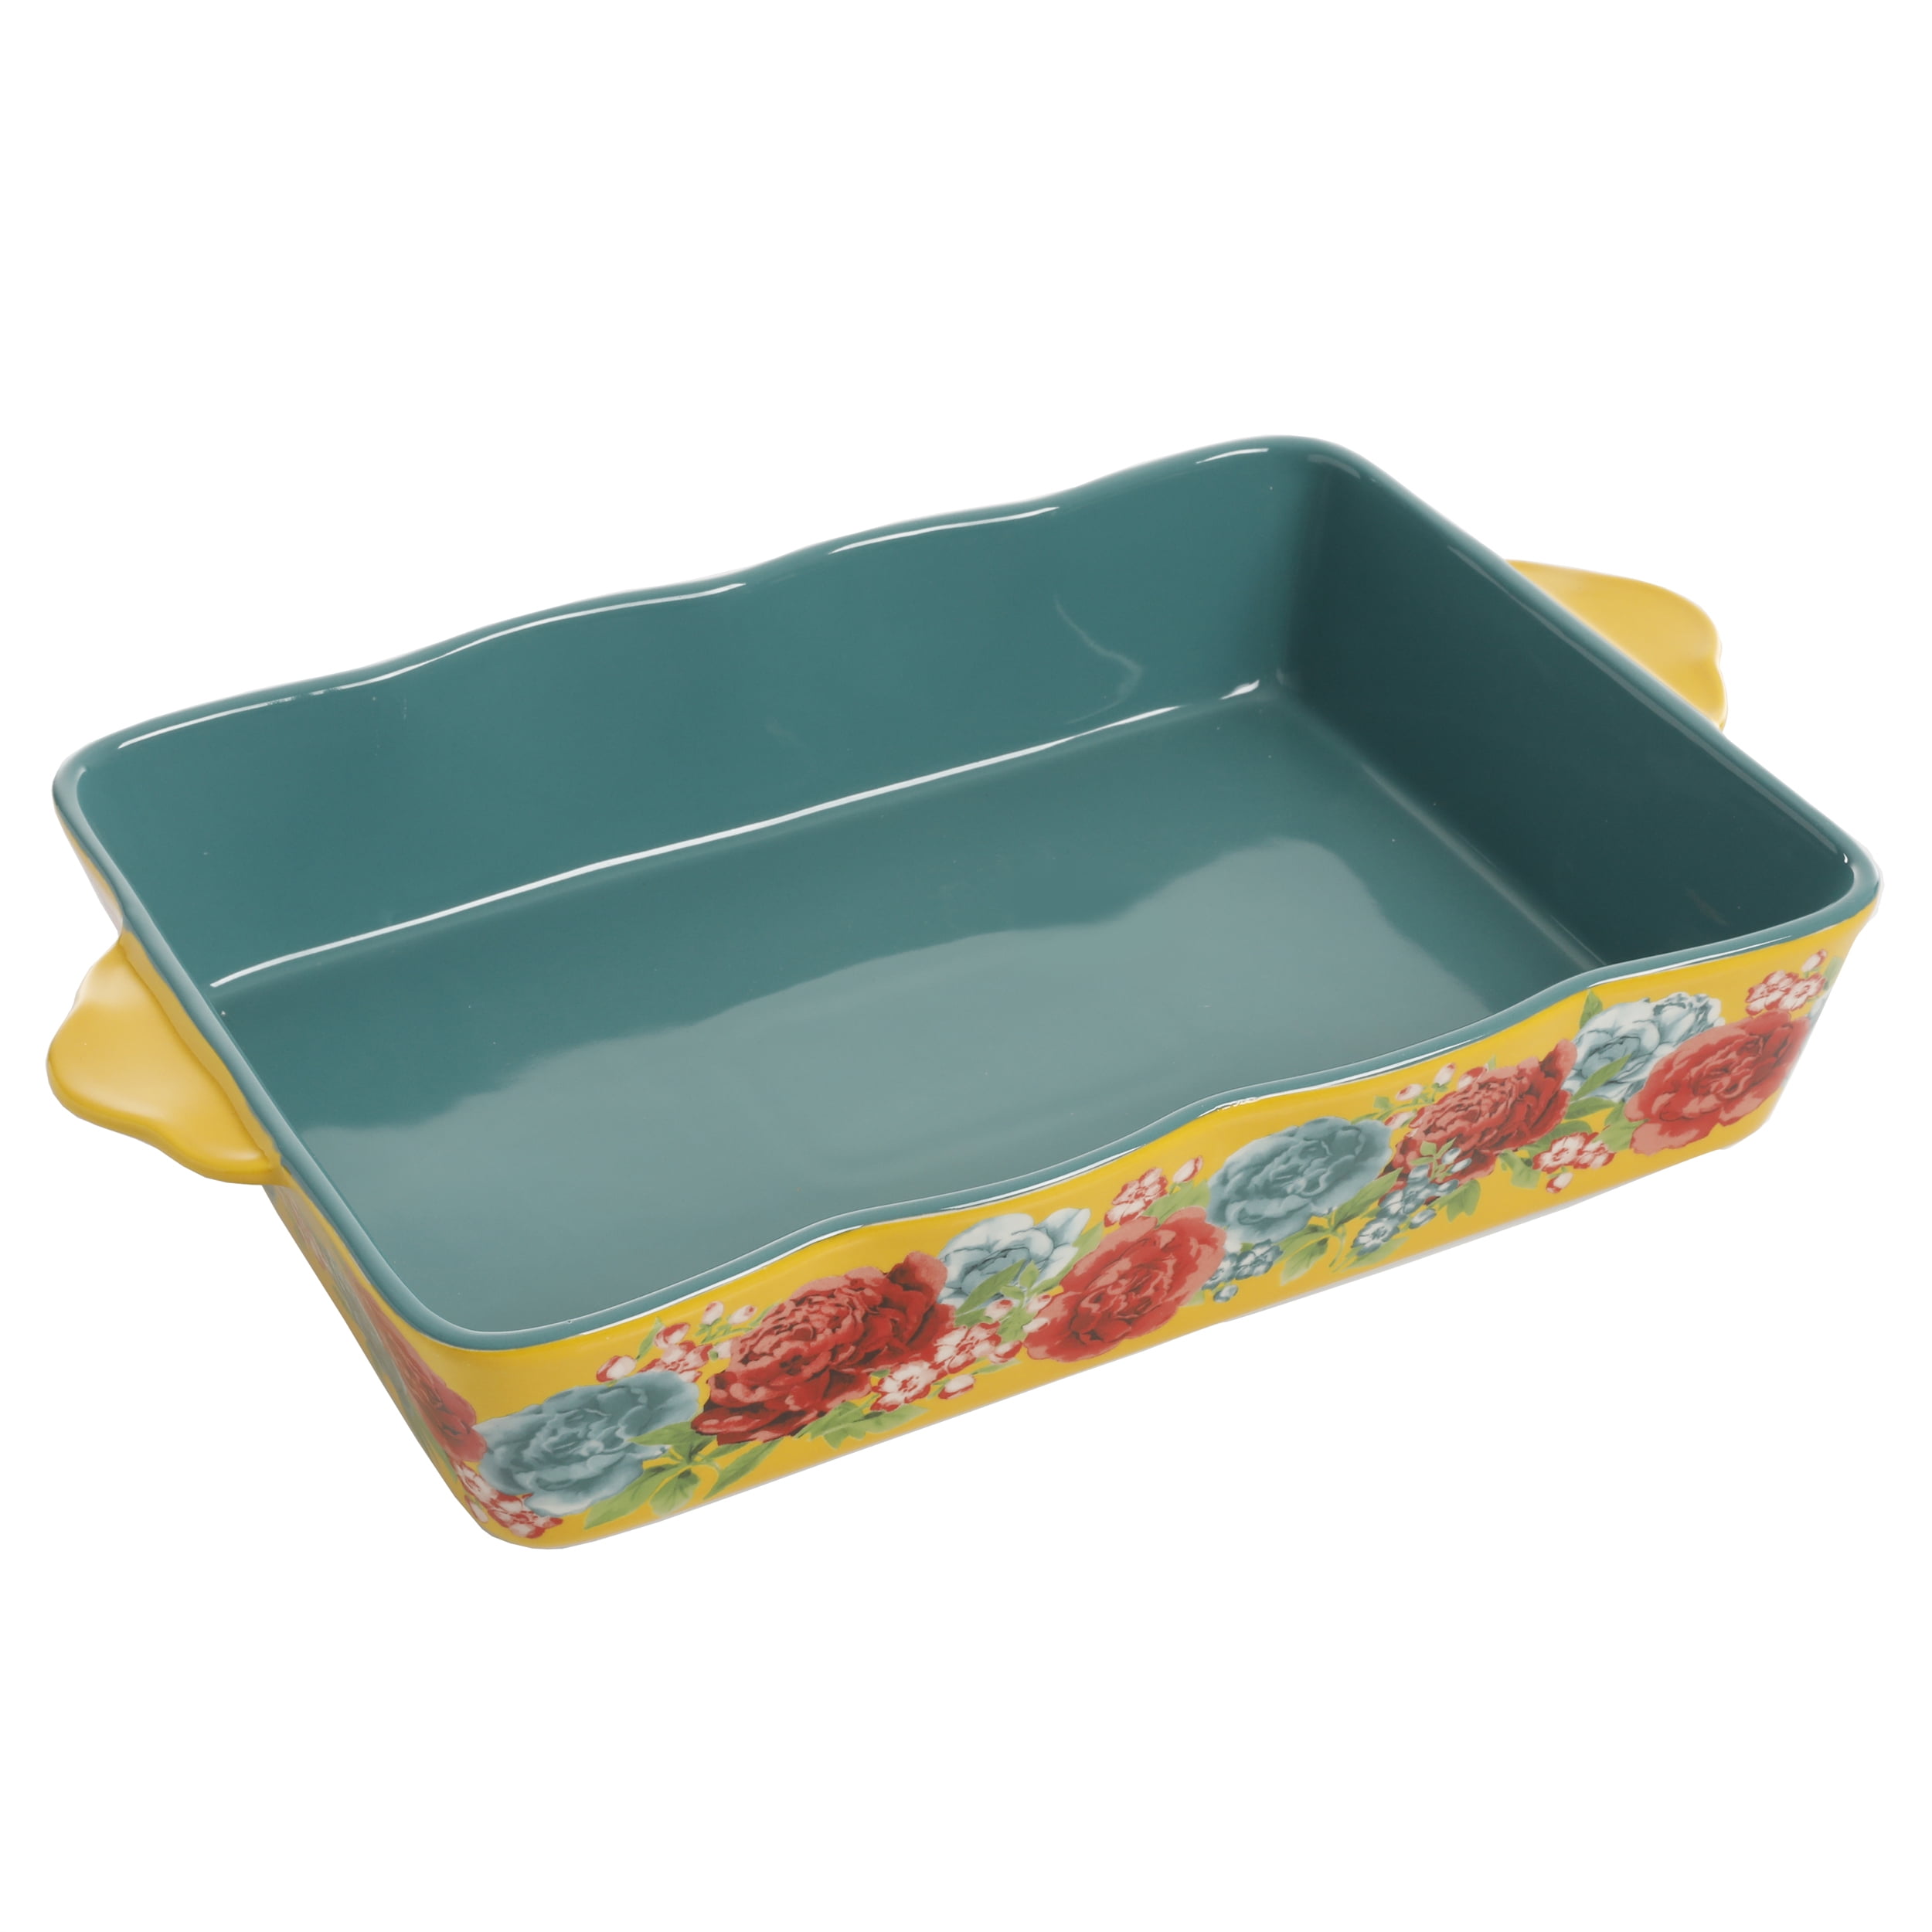 The Pioneer Woman Baking Dish Spring Bouquet 2-Piece Baker Set